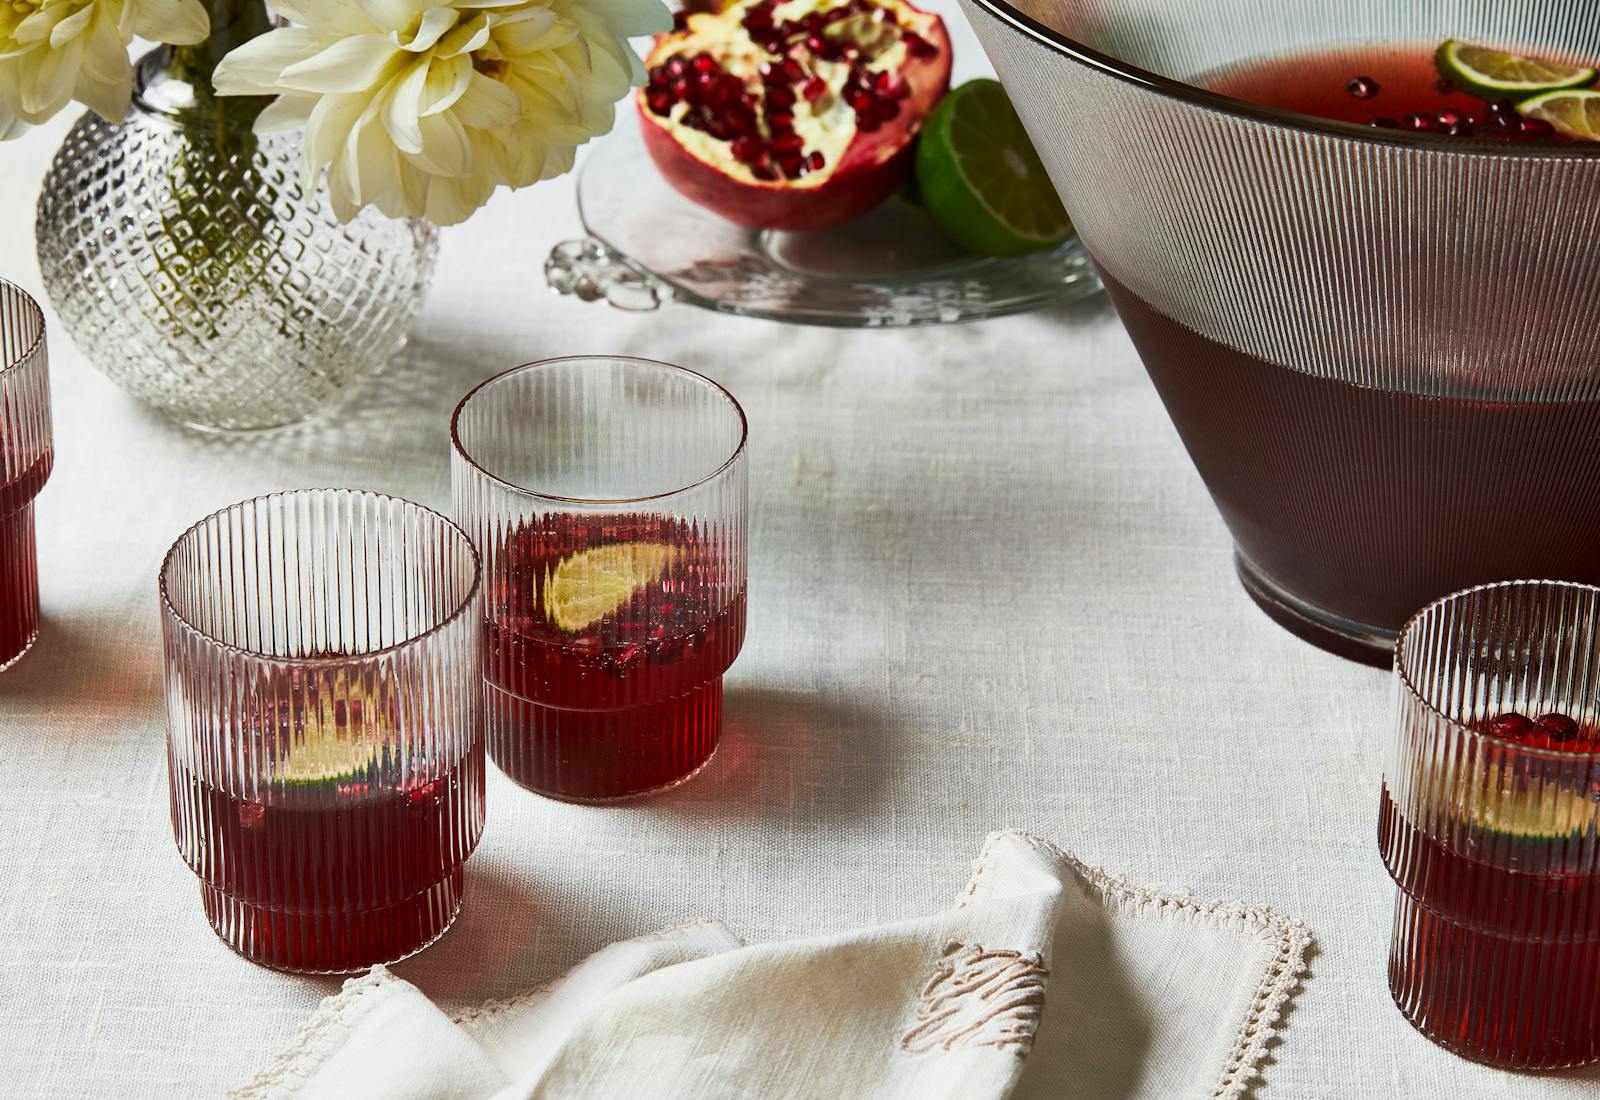 17. Pomegranate-Lime Tequila Spritzer